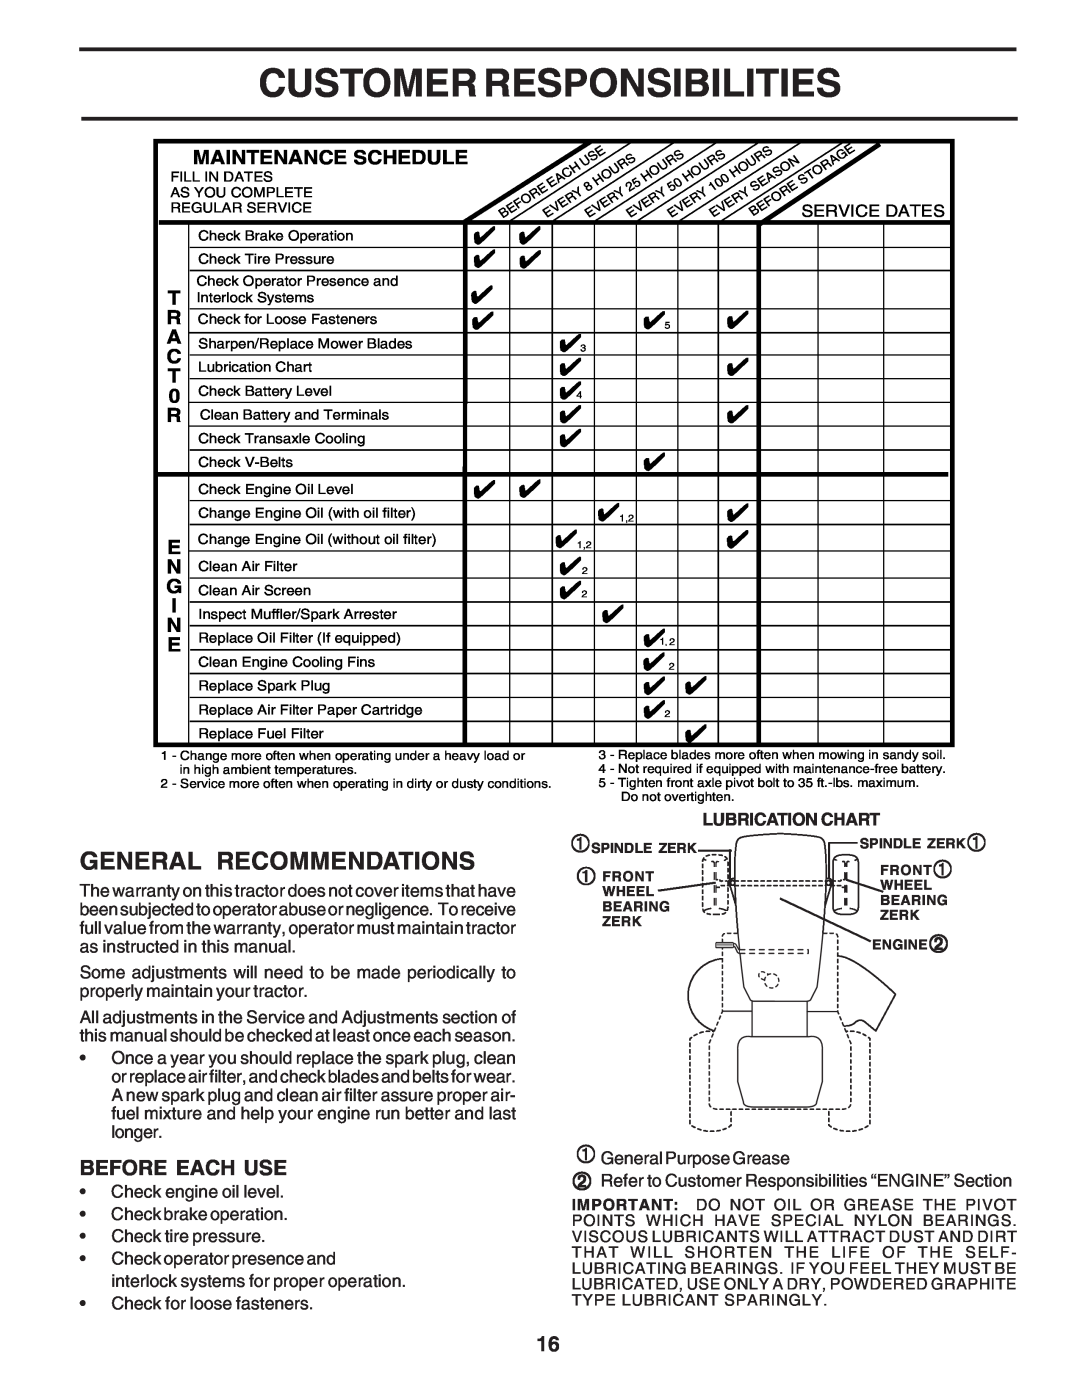 Poulan 183284 owner manual Customer Responsibilities, General Recommendations, Before Each Use, Maintenance Schedule 